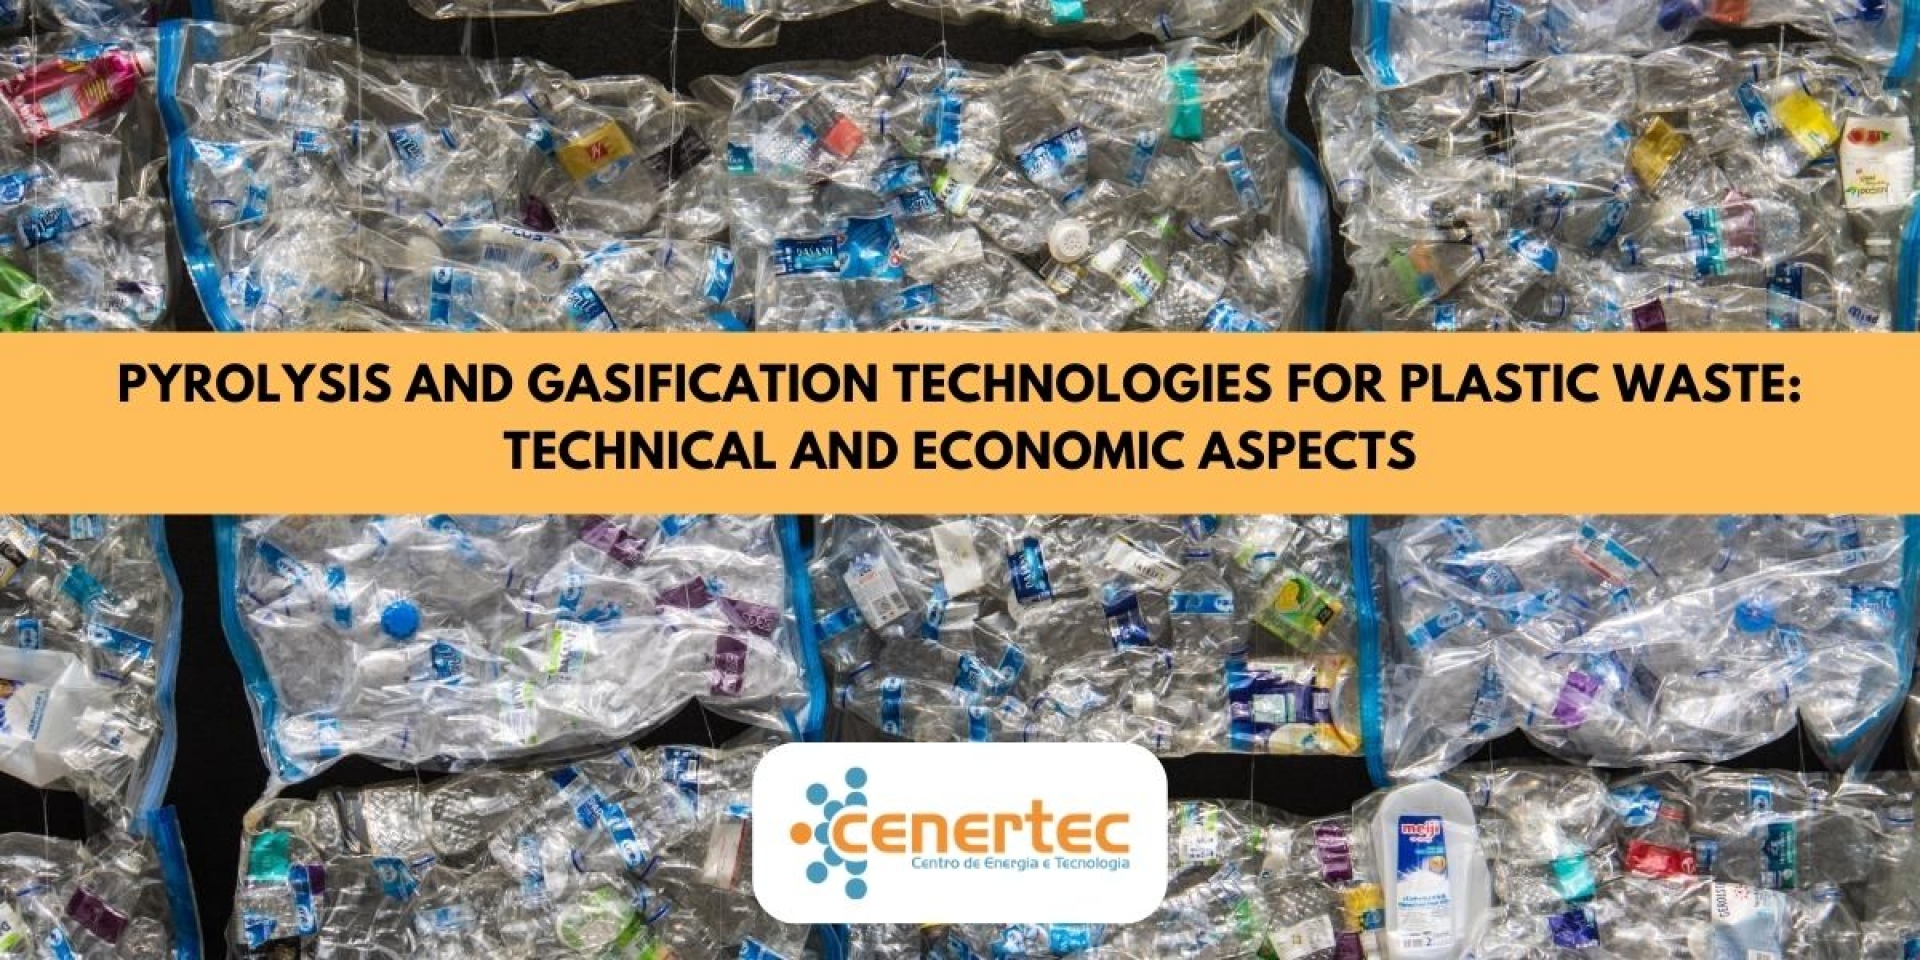 Pyrolysis and Gasification Technologies for Plastic Waste: Technical and Economic Aspects